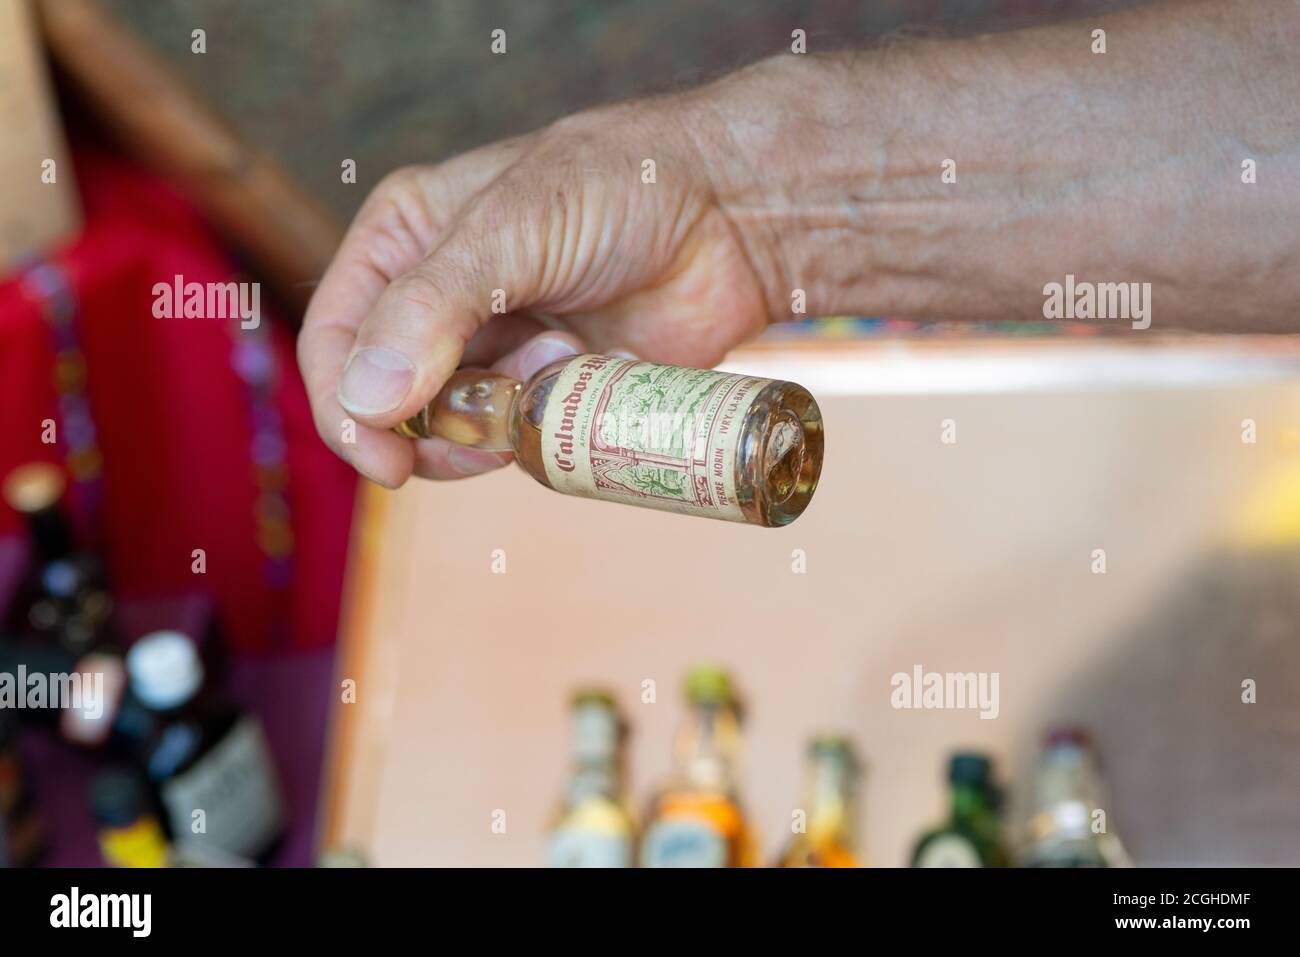 Italy, Lombardy, Old Minil Alcohol Bottles Stock Photo